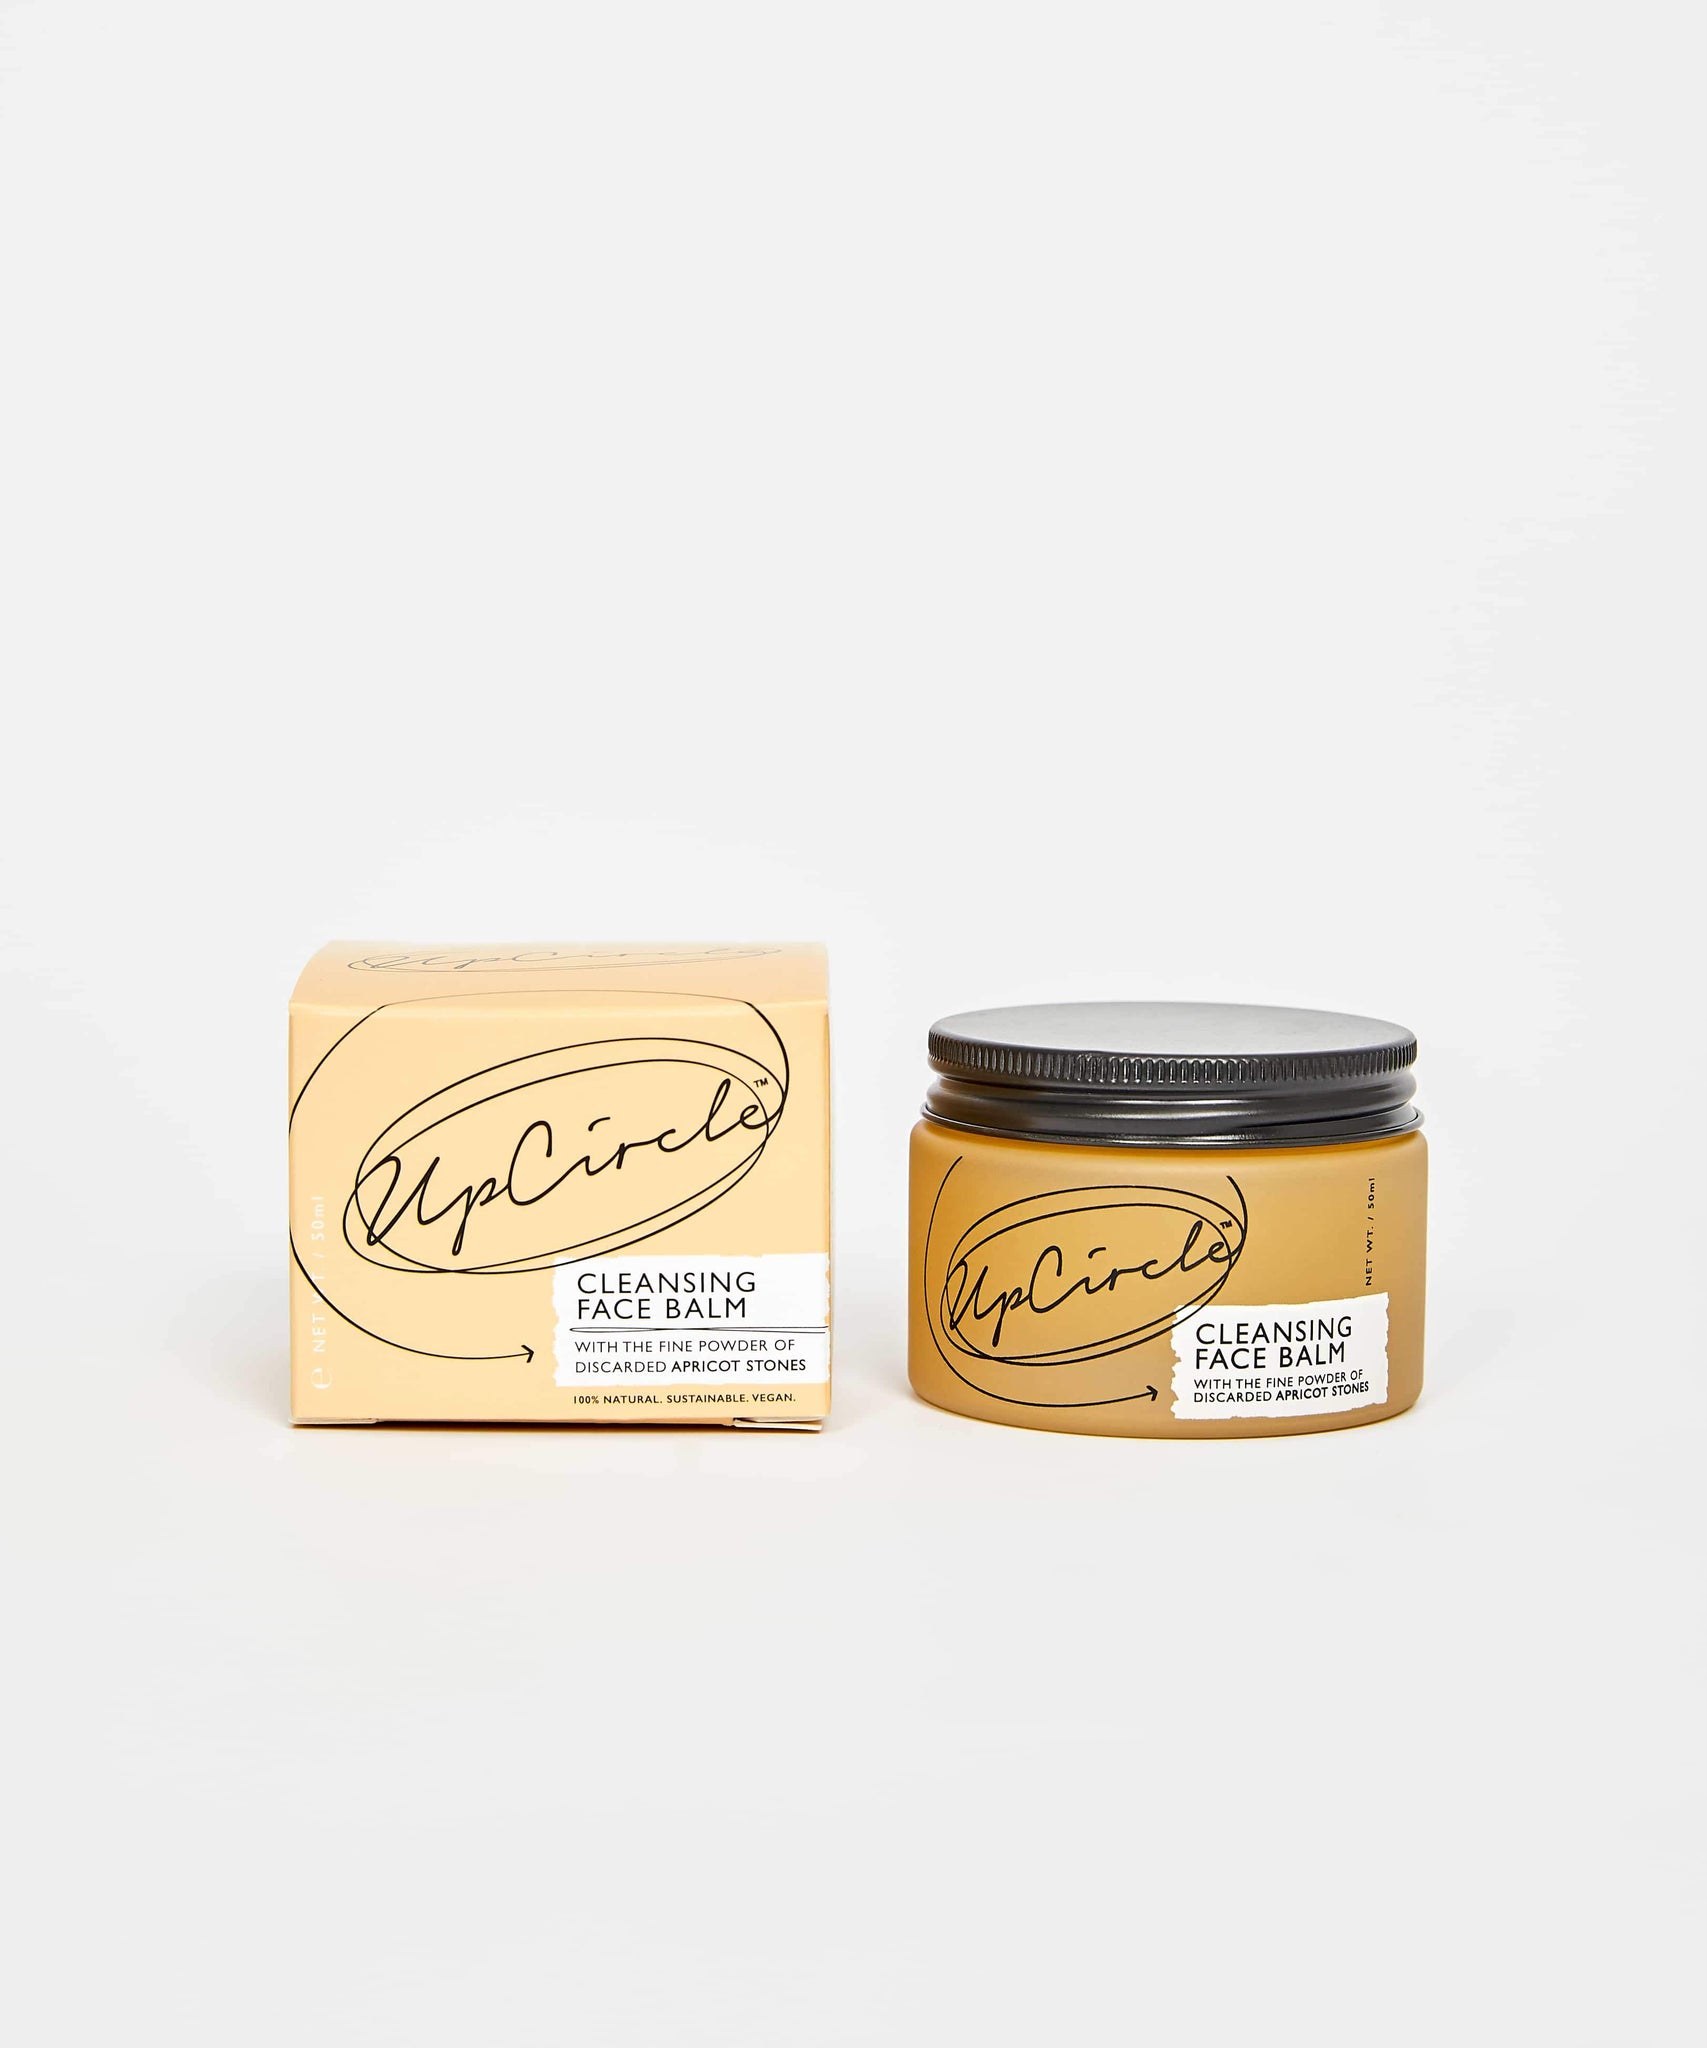 Cleansing Face Balm with Apricot Powder 50ml